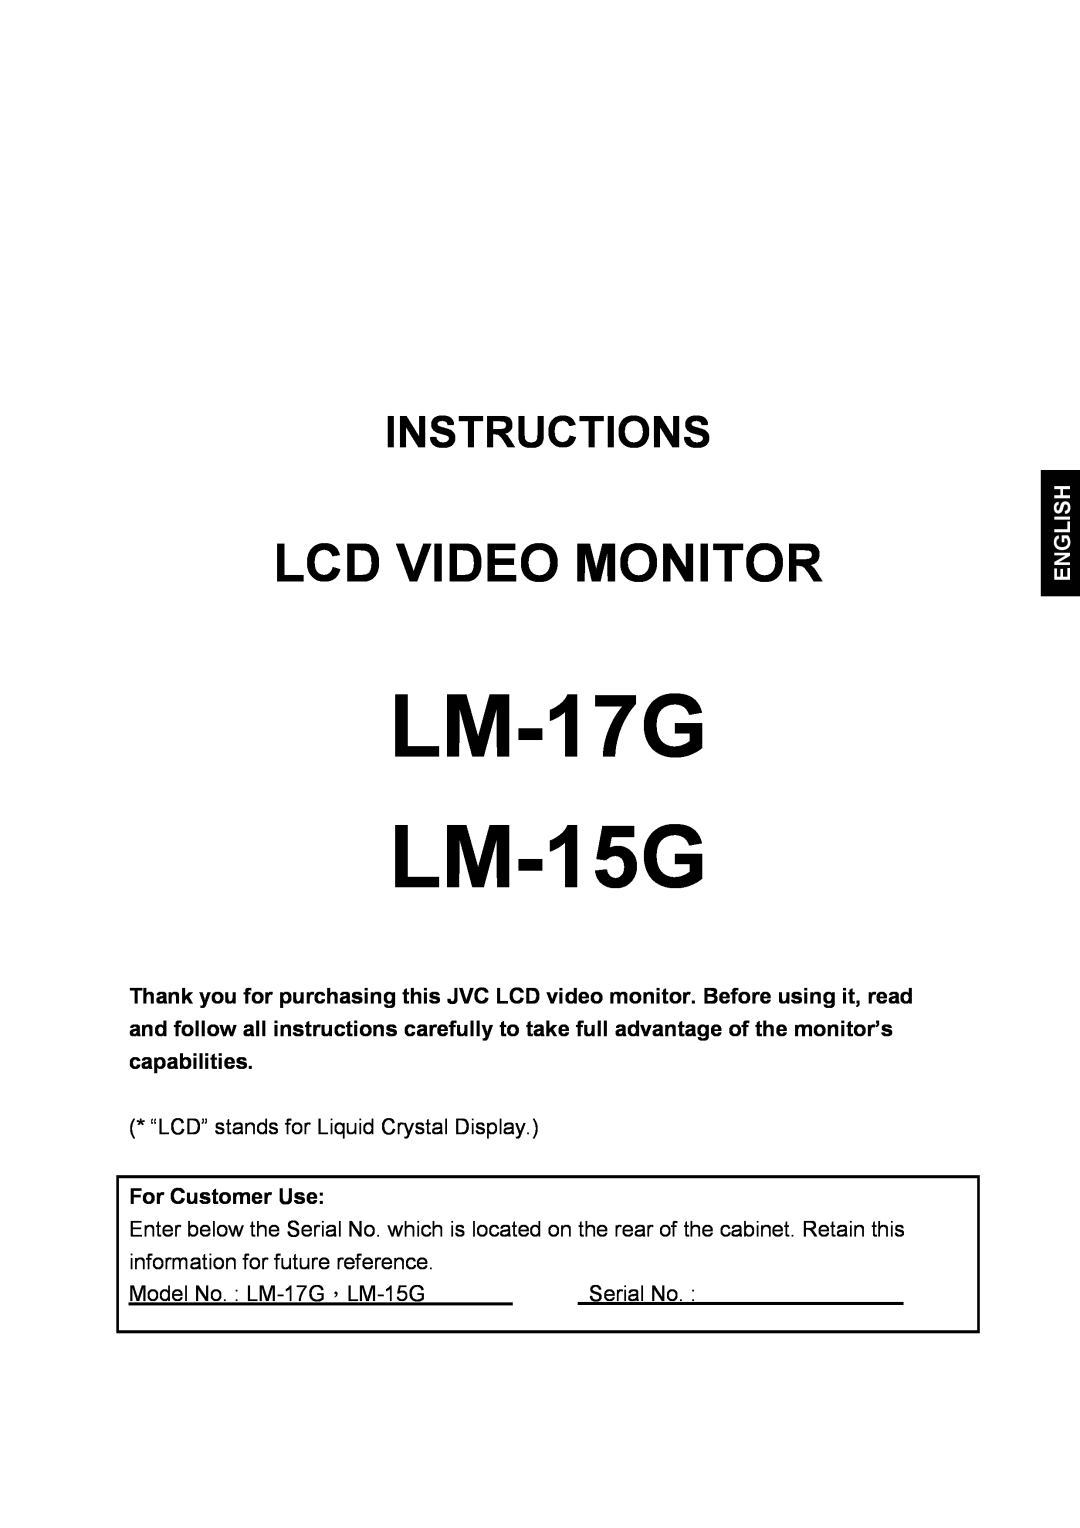 JVC LM-17G manual Instructions, “LCD” stands for Liquid Crystal Display, For Customer Use, information for future reference 